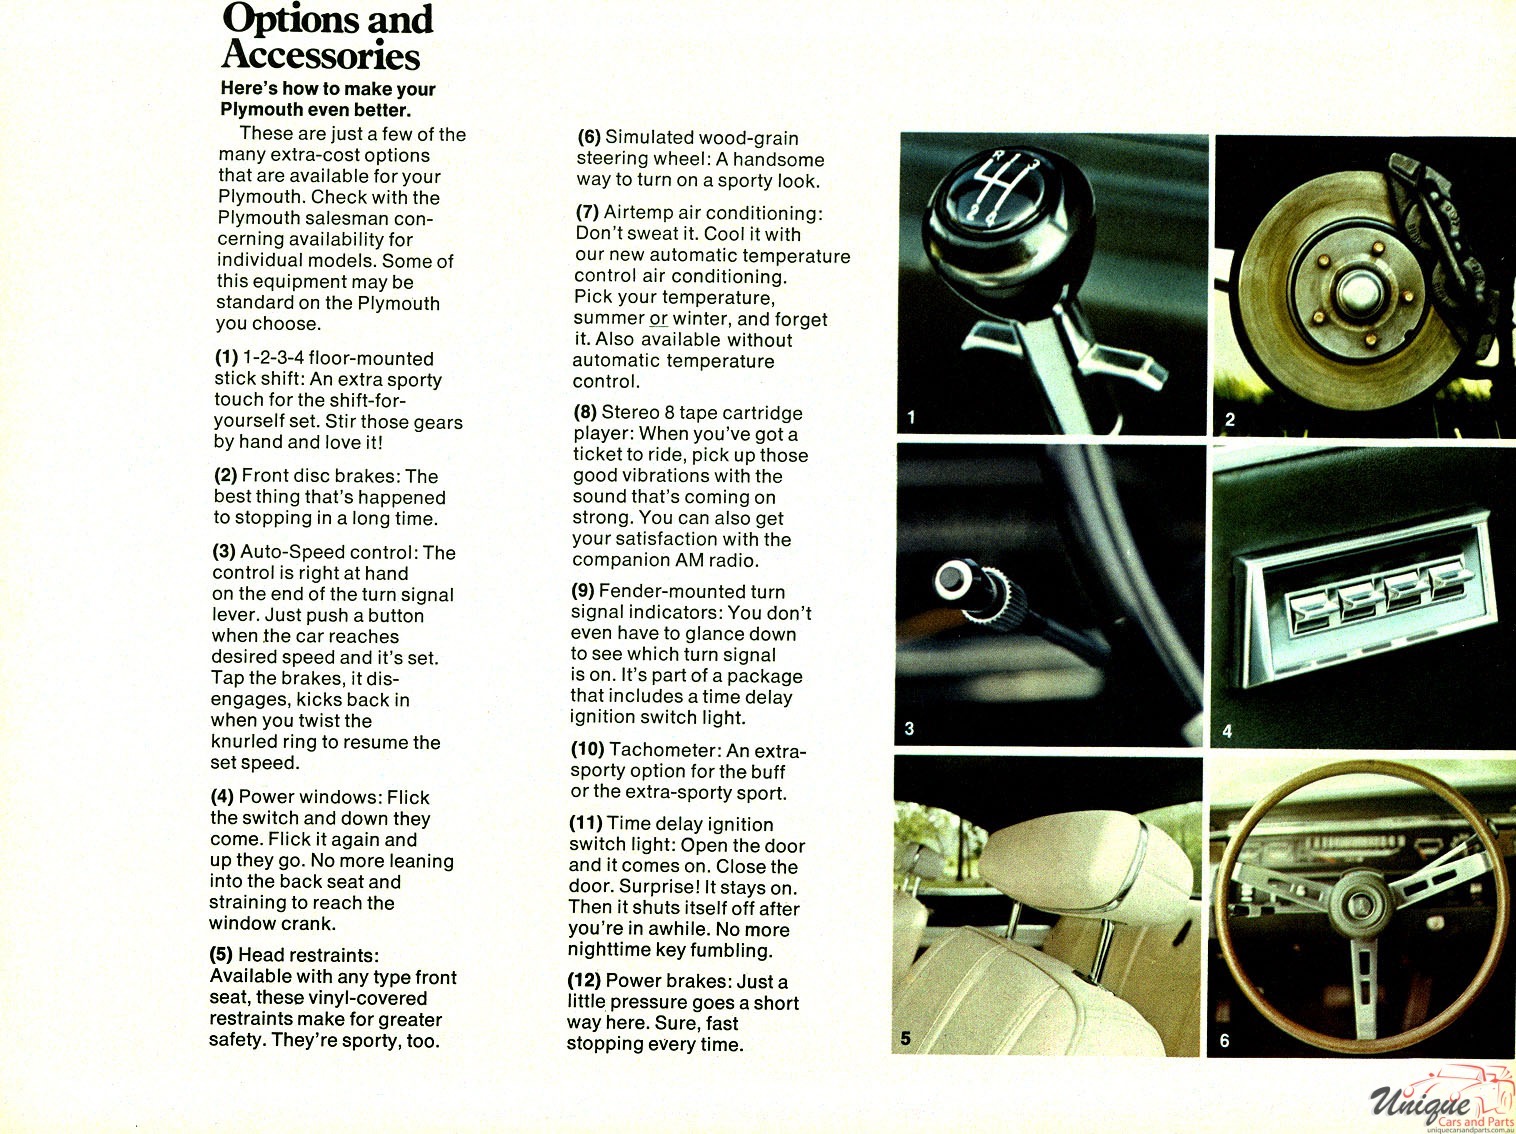 1968 Plymouth All Models Brochure Page 5